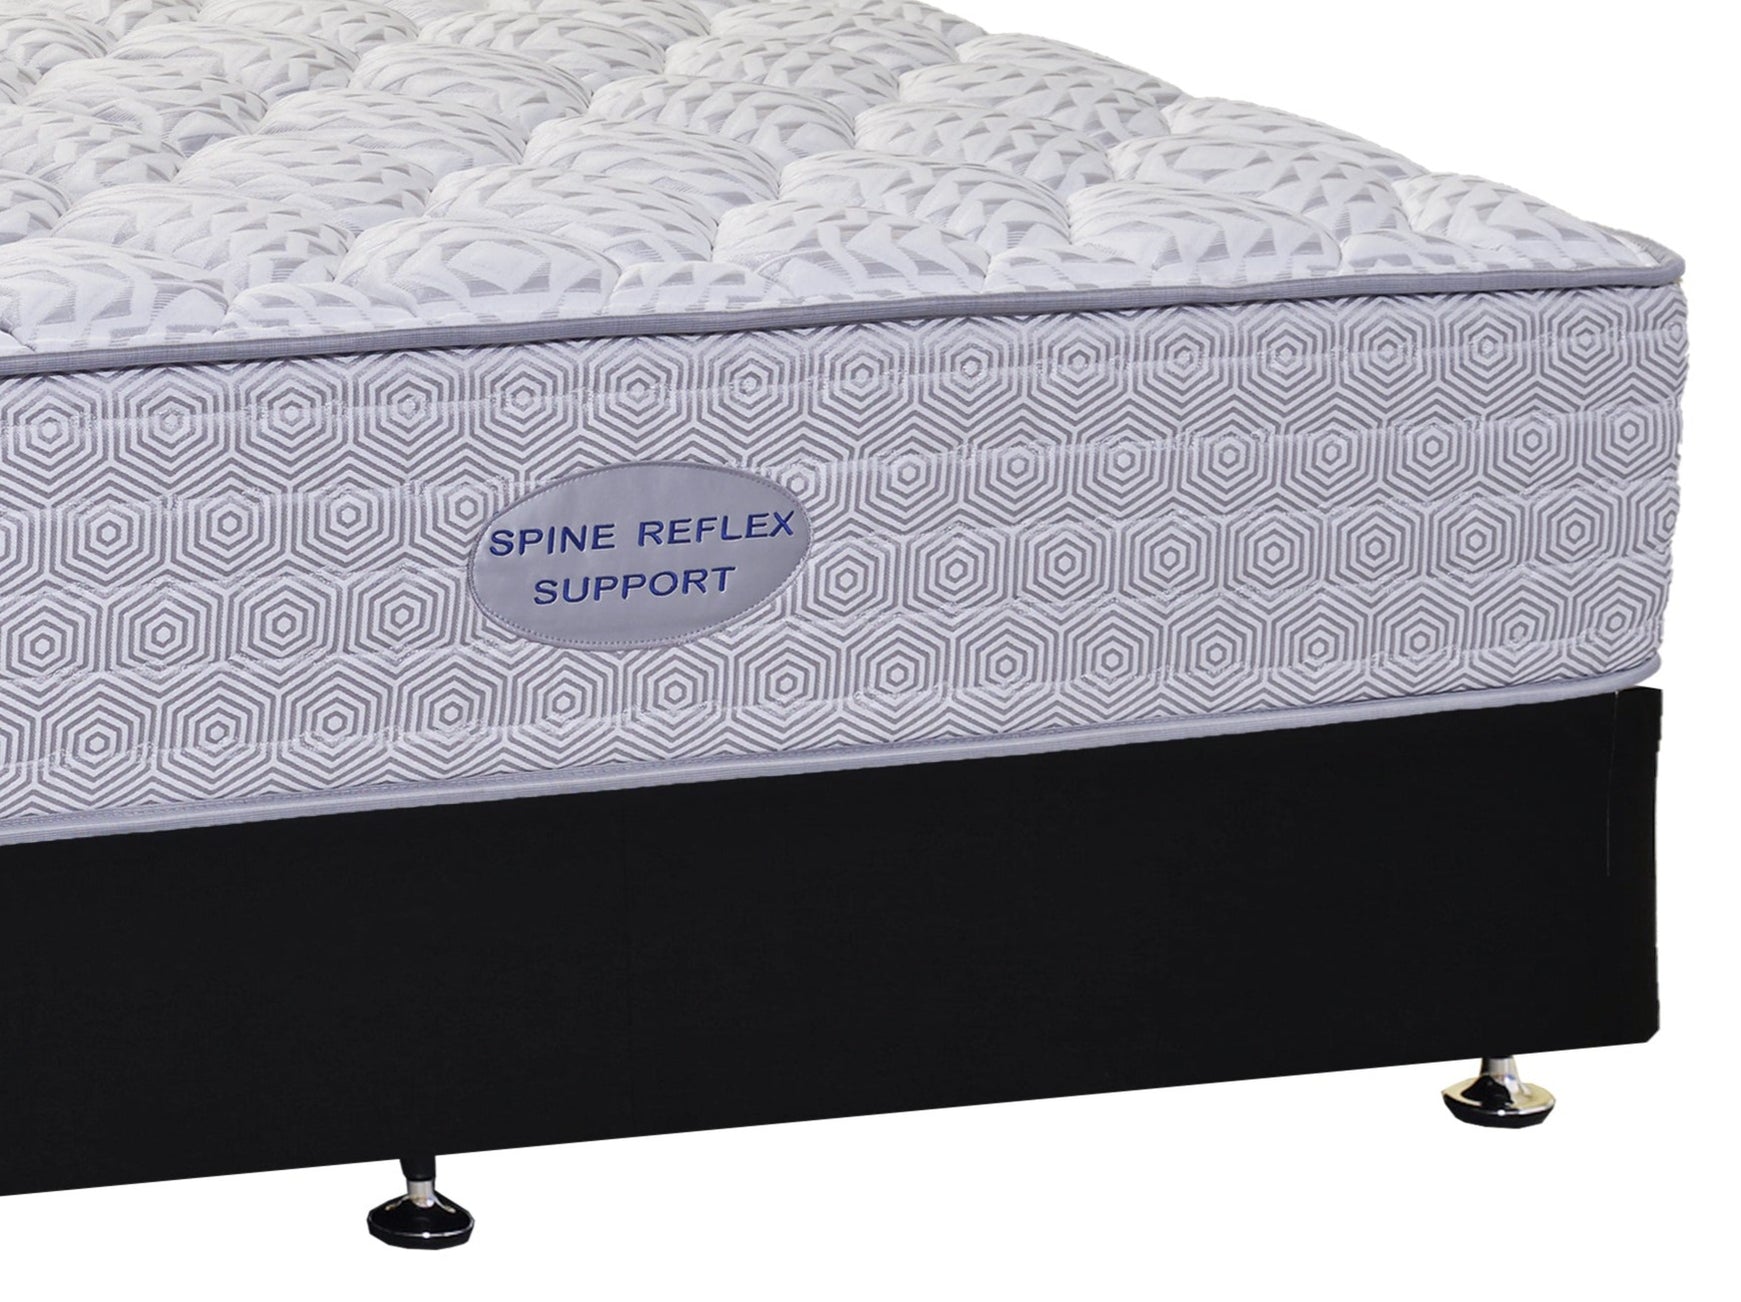 queen bed mattress for sale perth